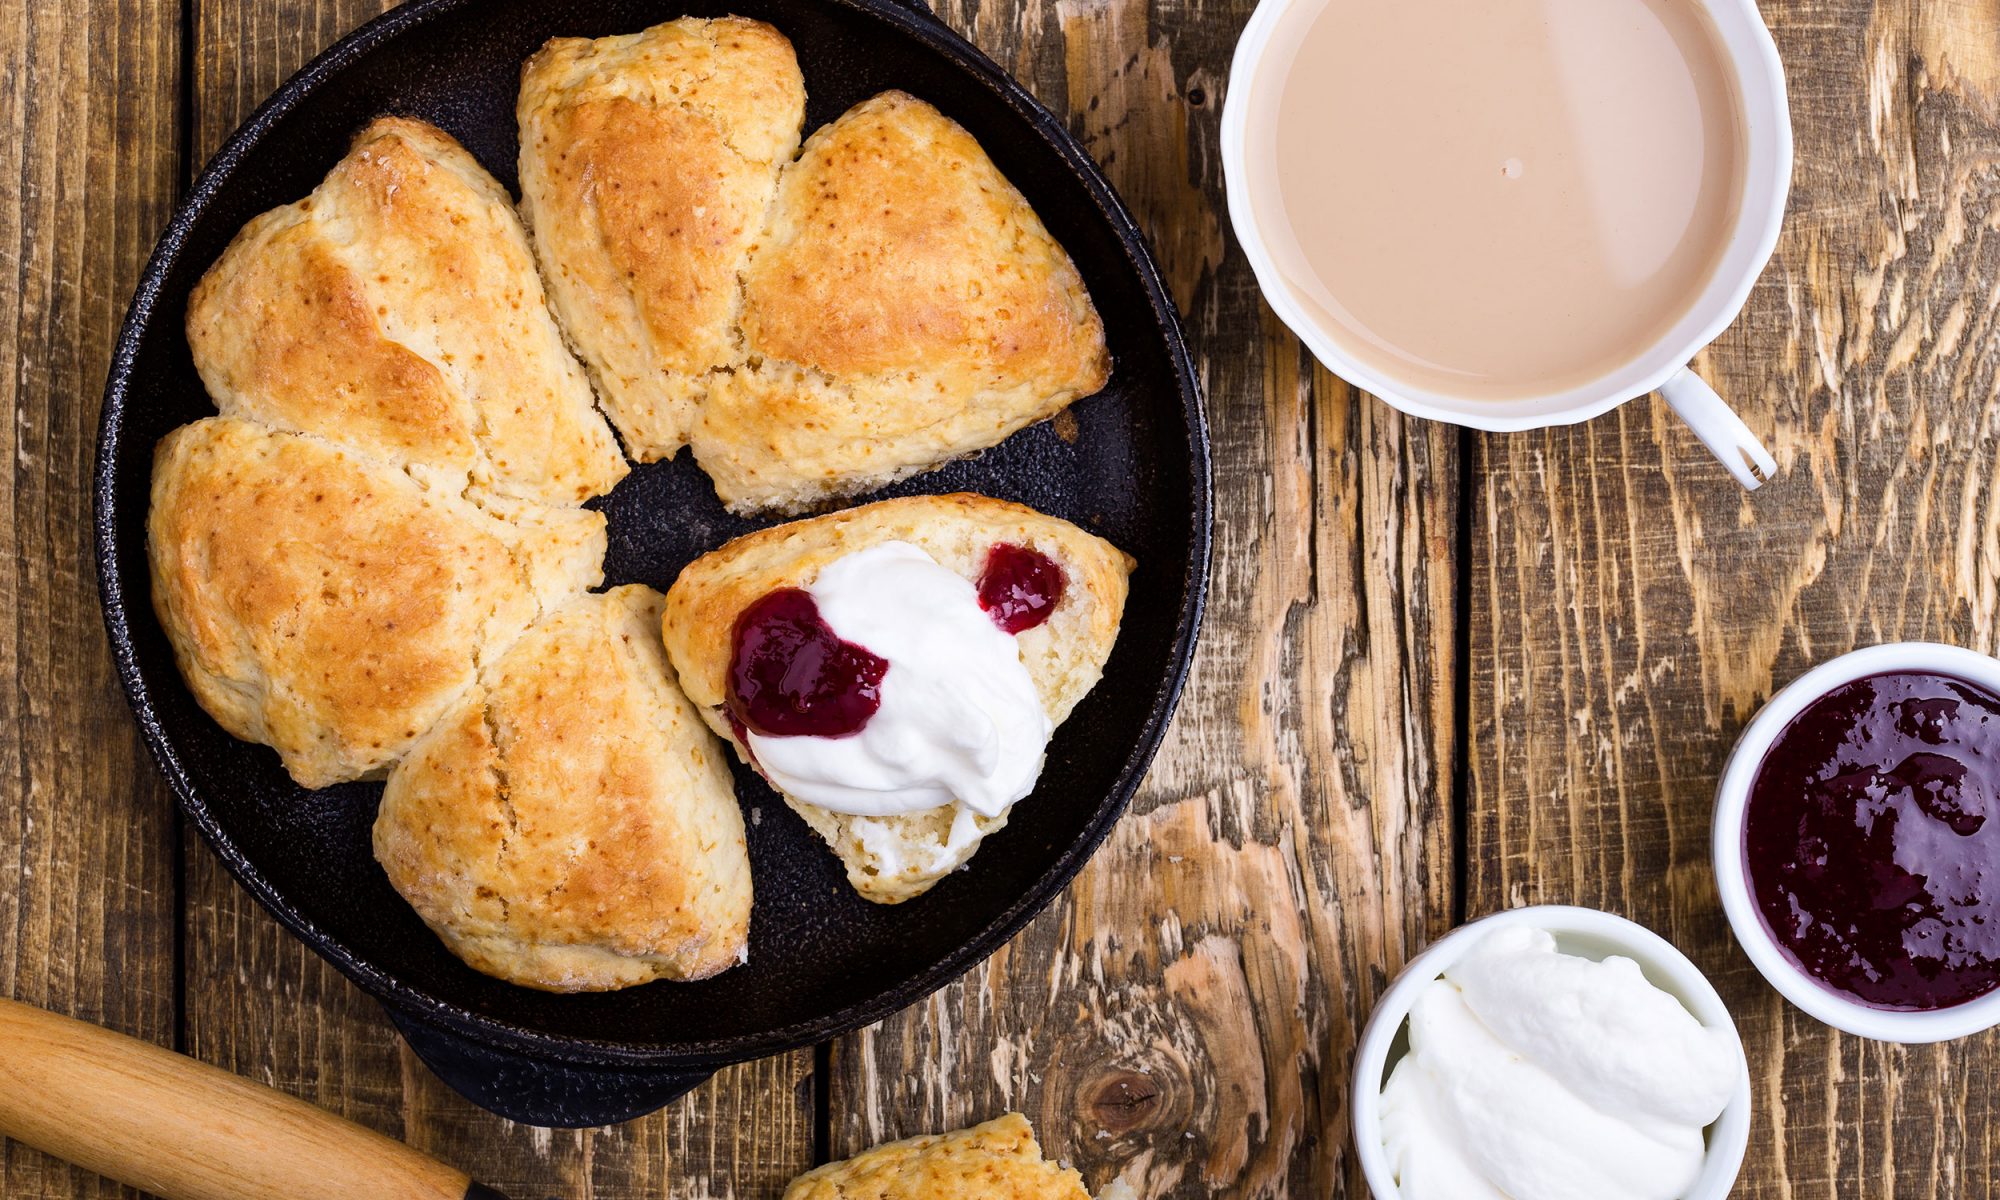 You Can Make Scones Without an Oven